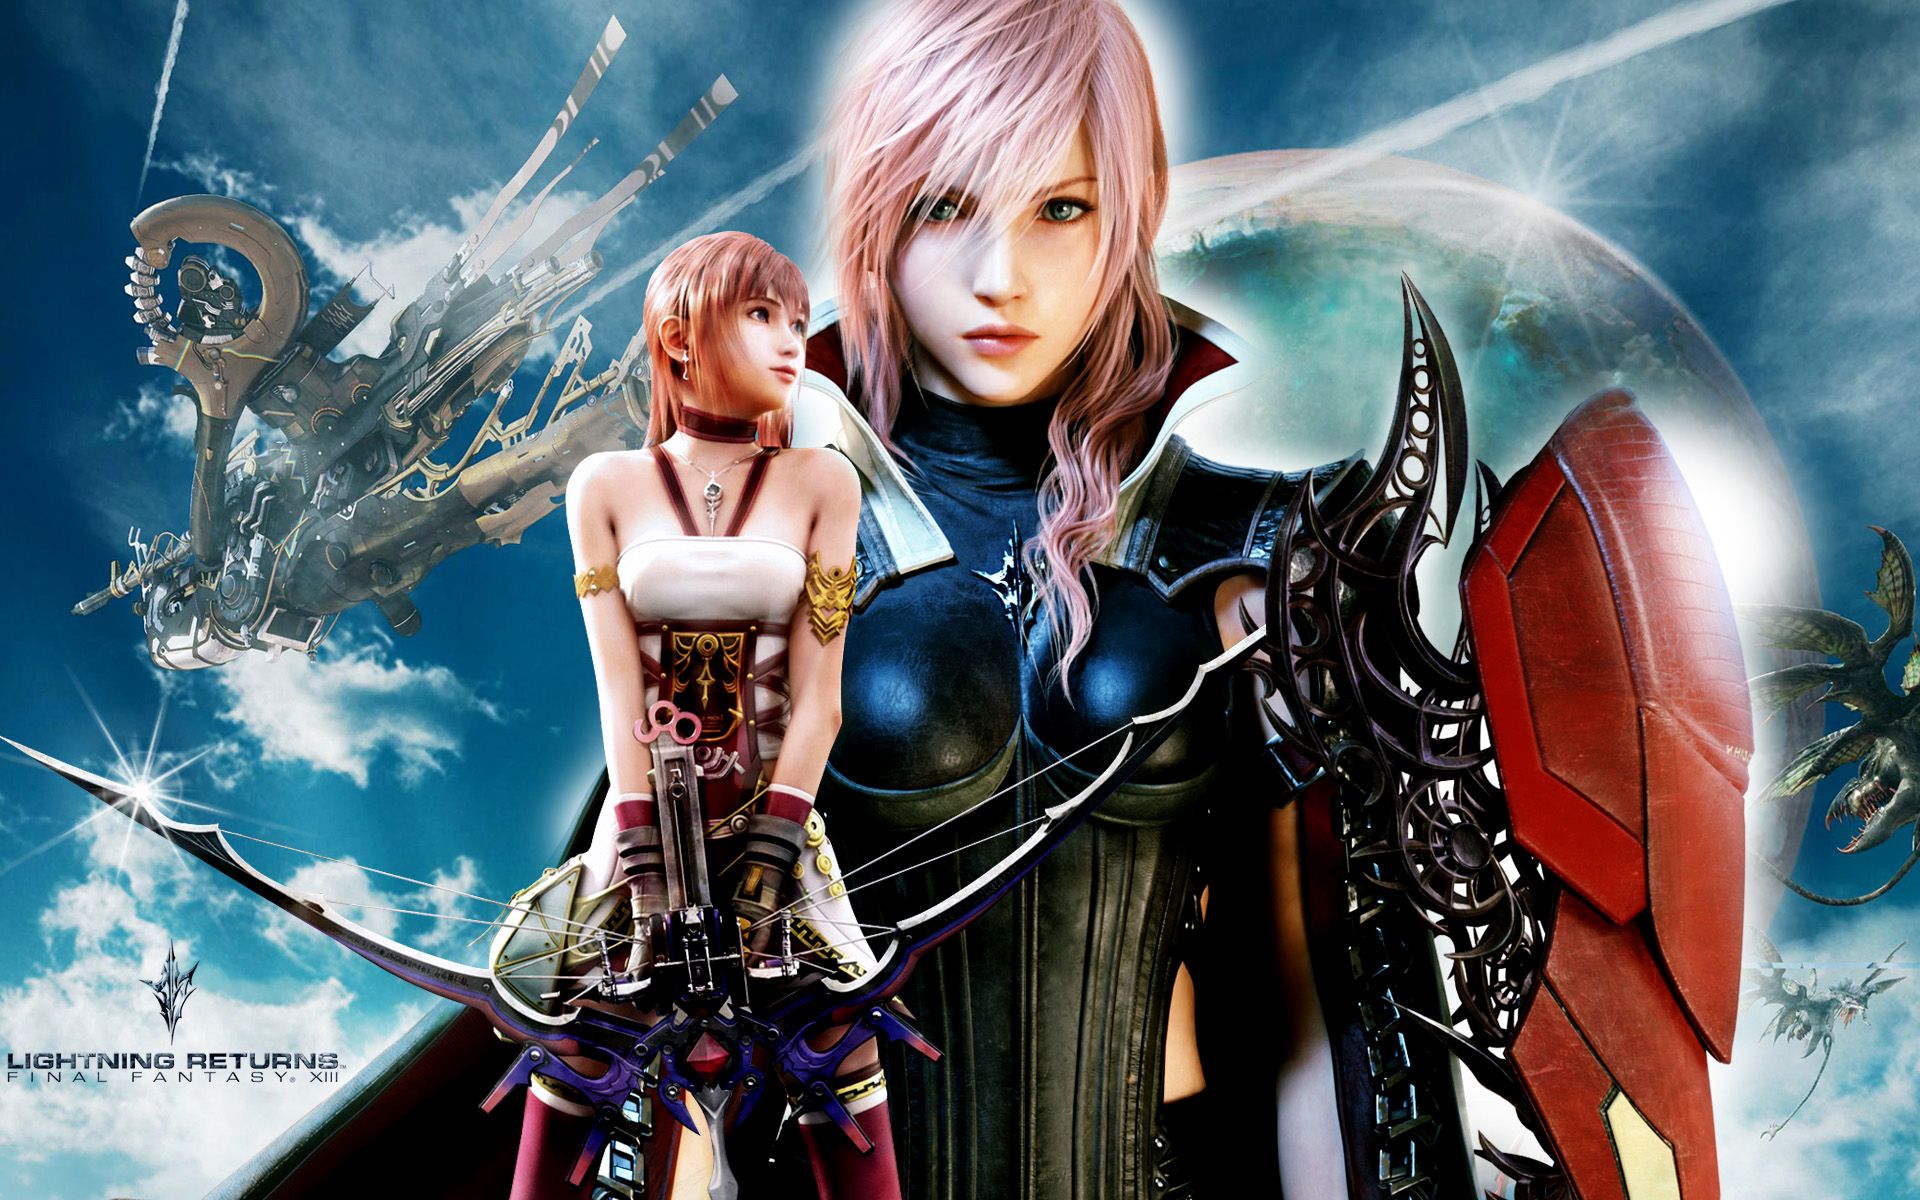 Claire and Serah